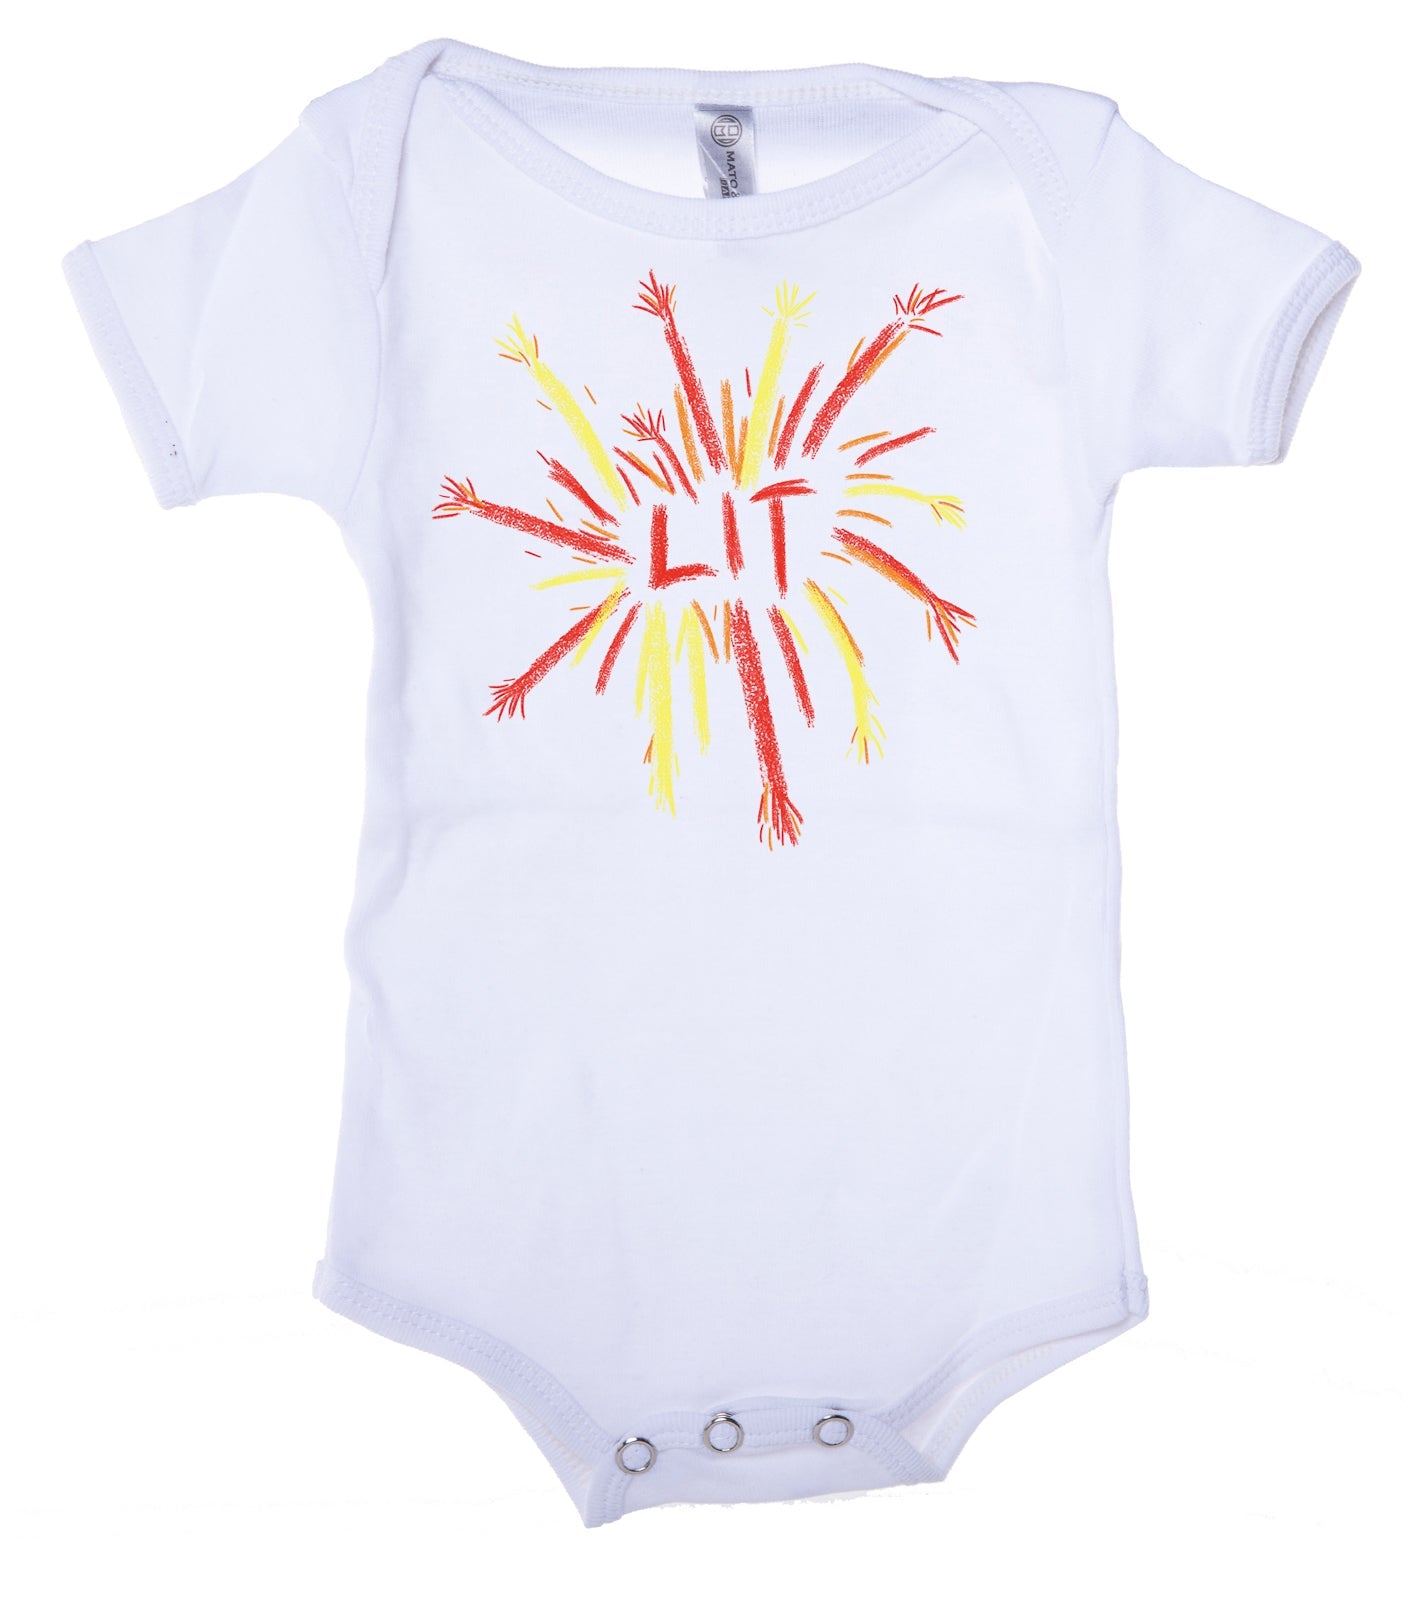 Lit Fireworks 4th of July Baby Romper - Mato & Hash